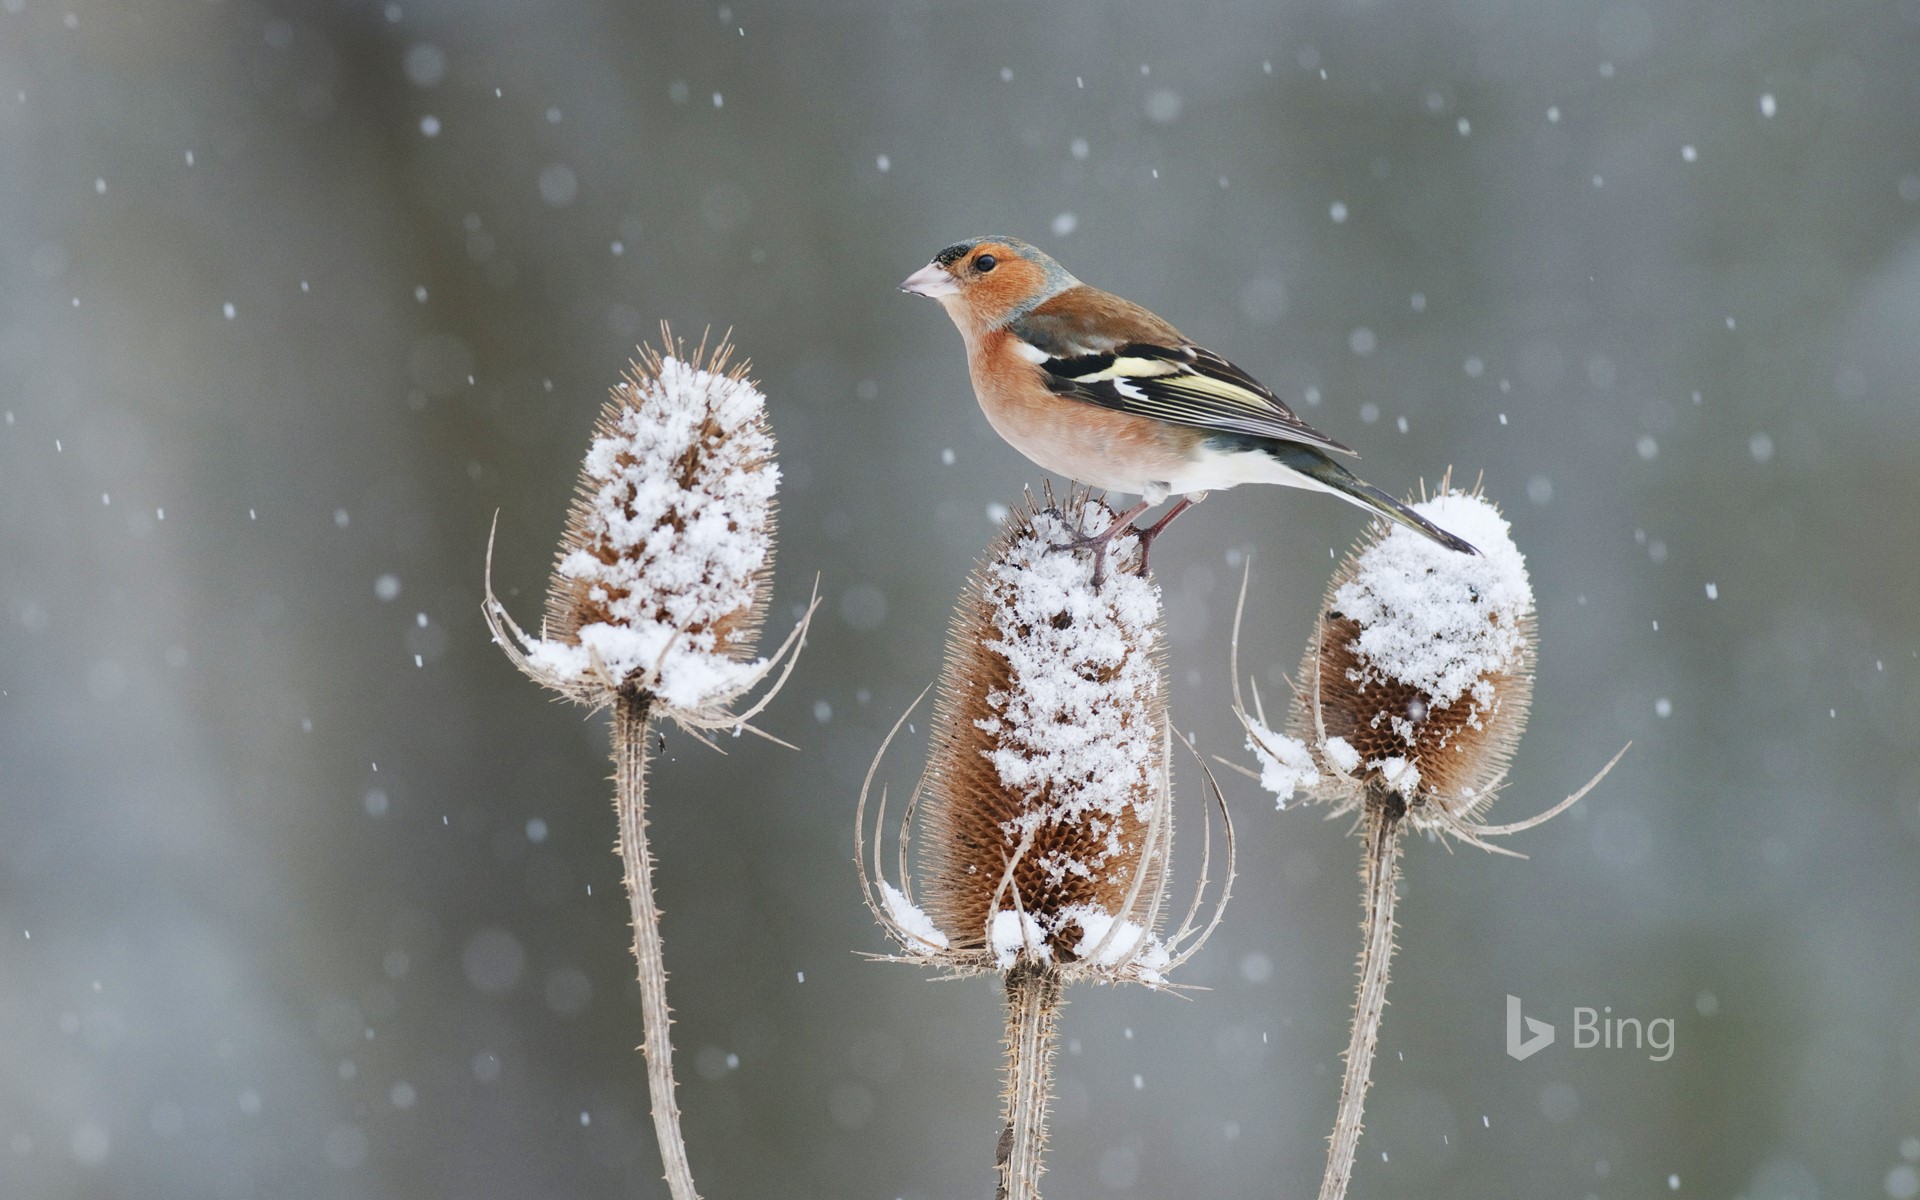 A chaffinch perched on a snow-covered teasel in Kent, England